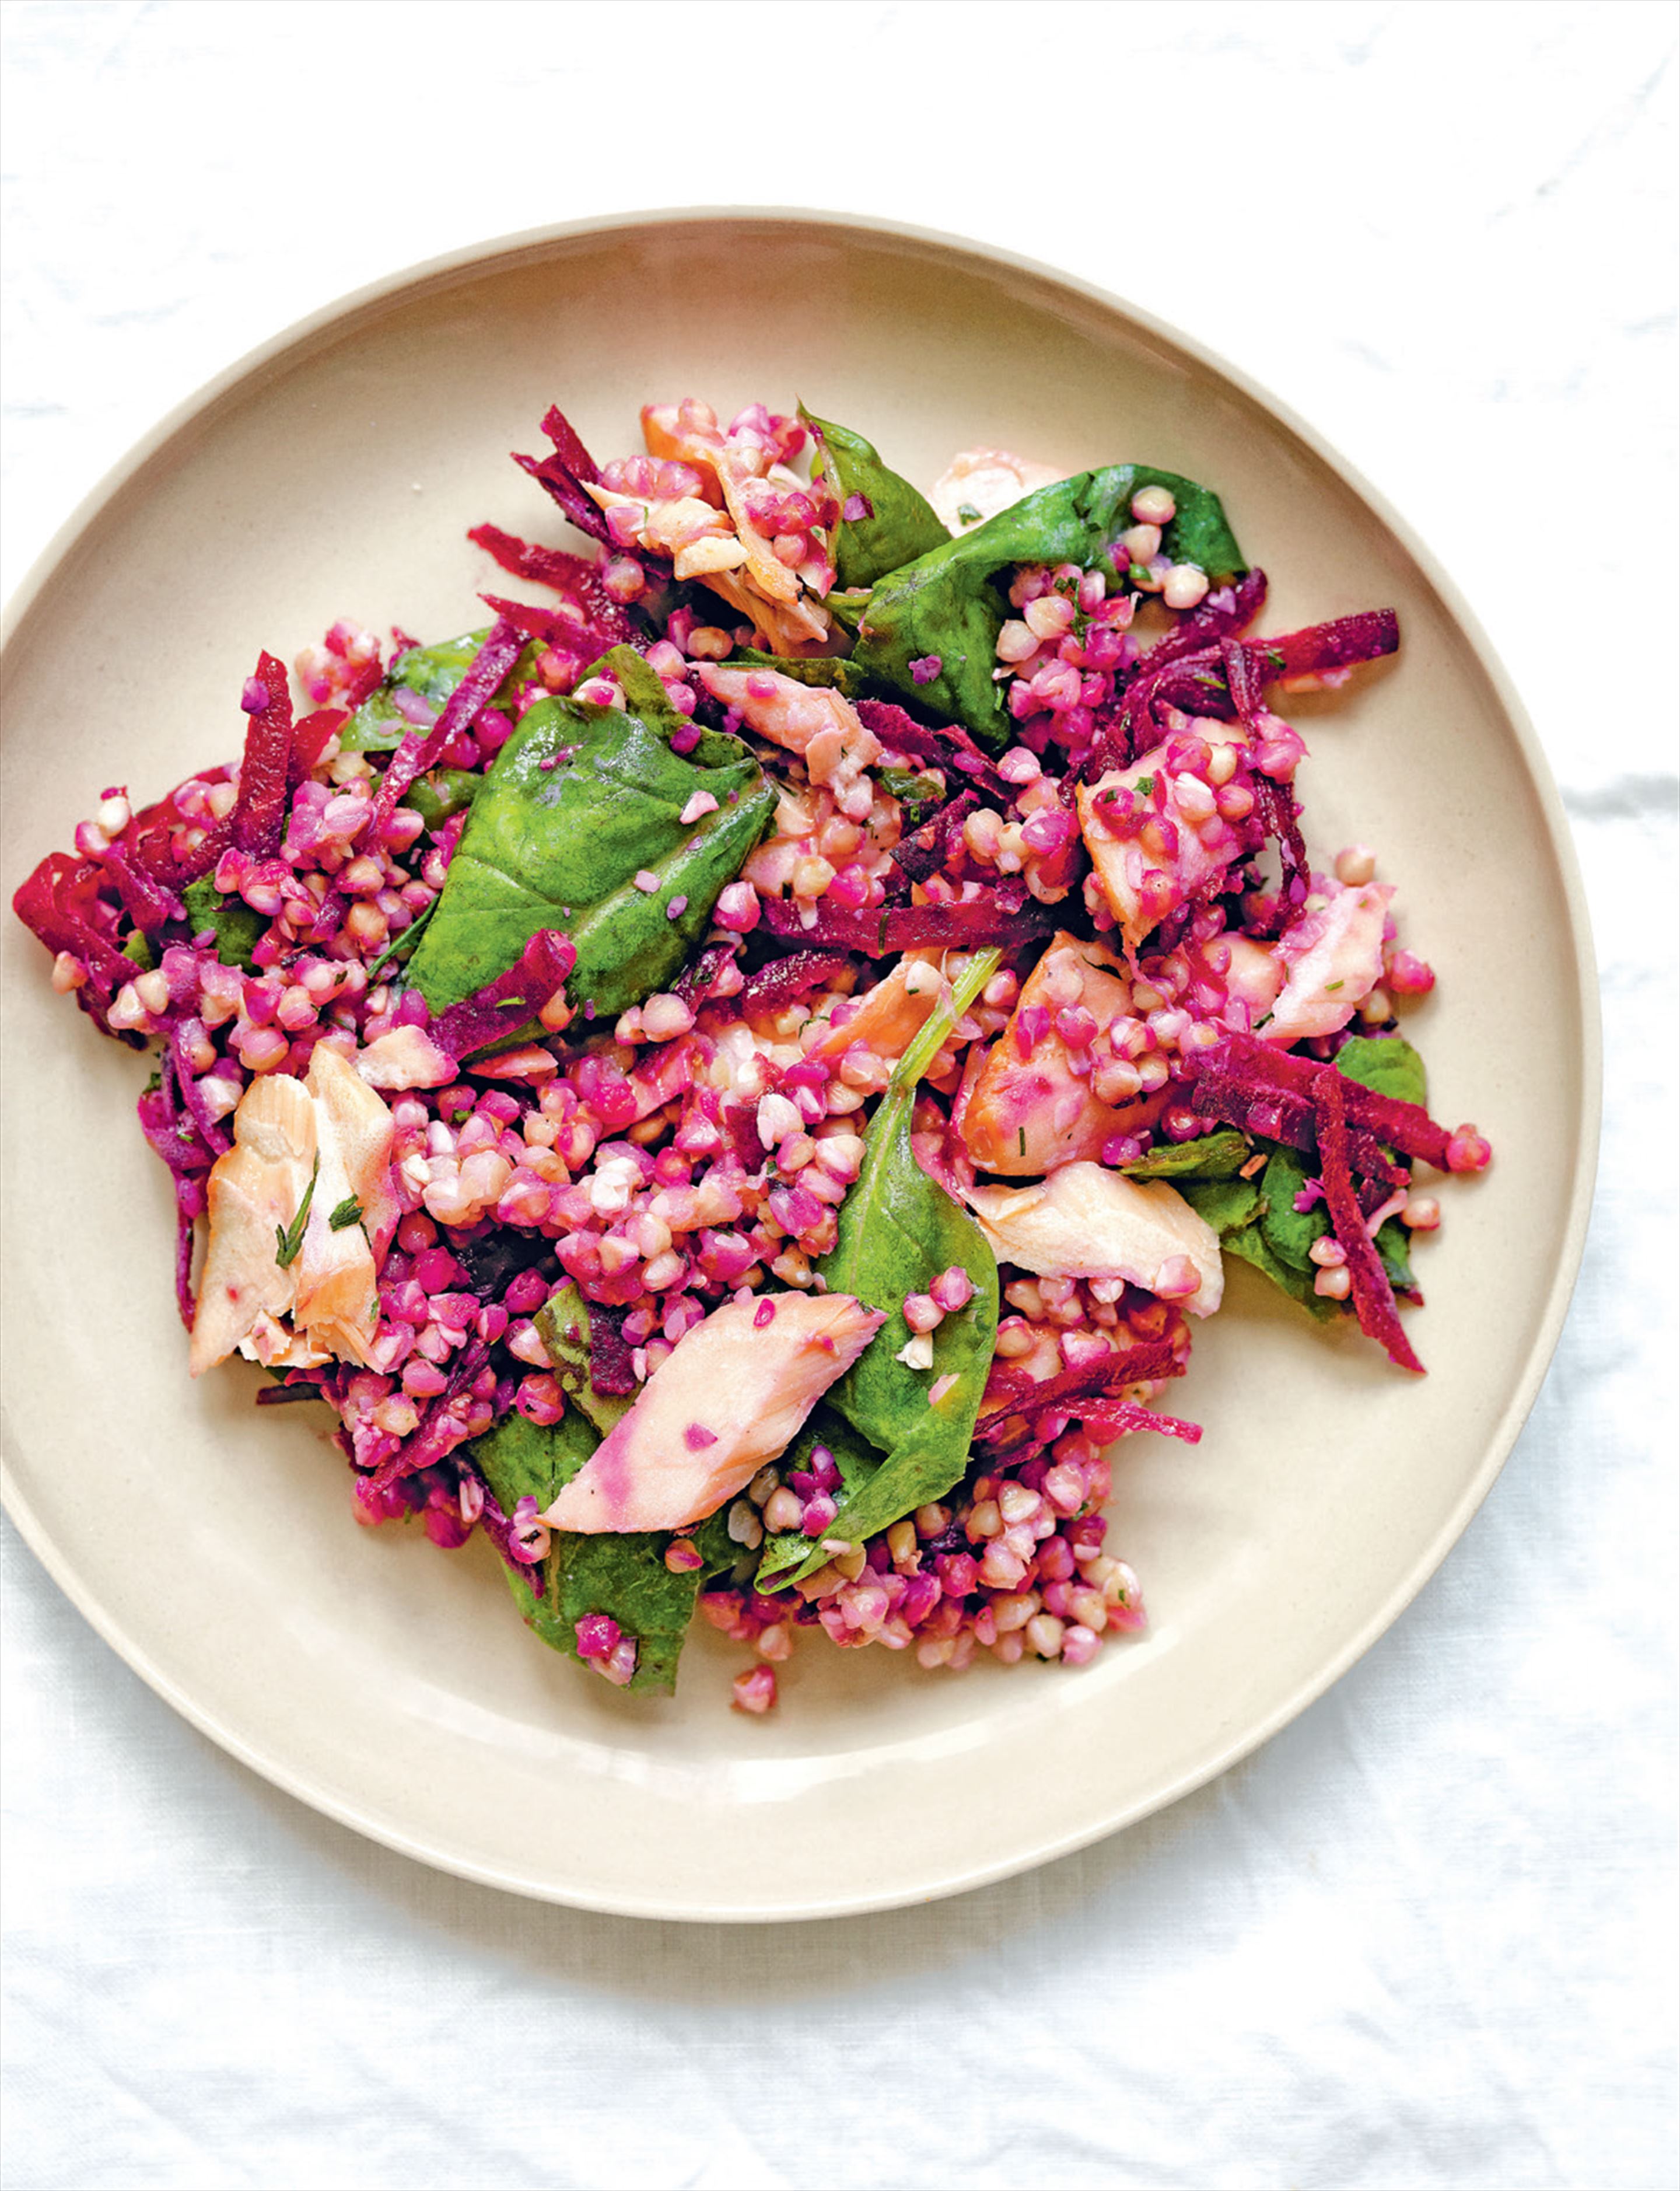 Buckwheat & salmon salad with beetroot & spinach